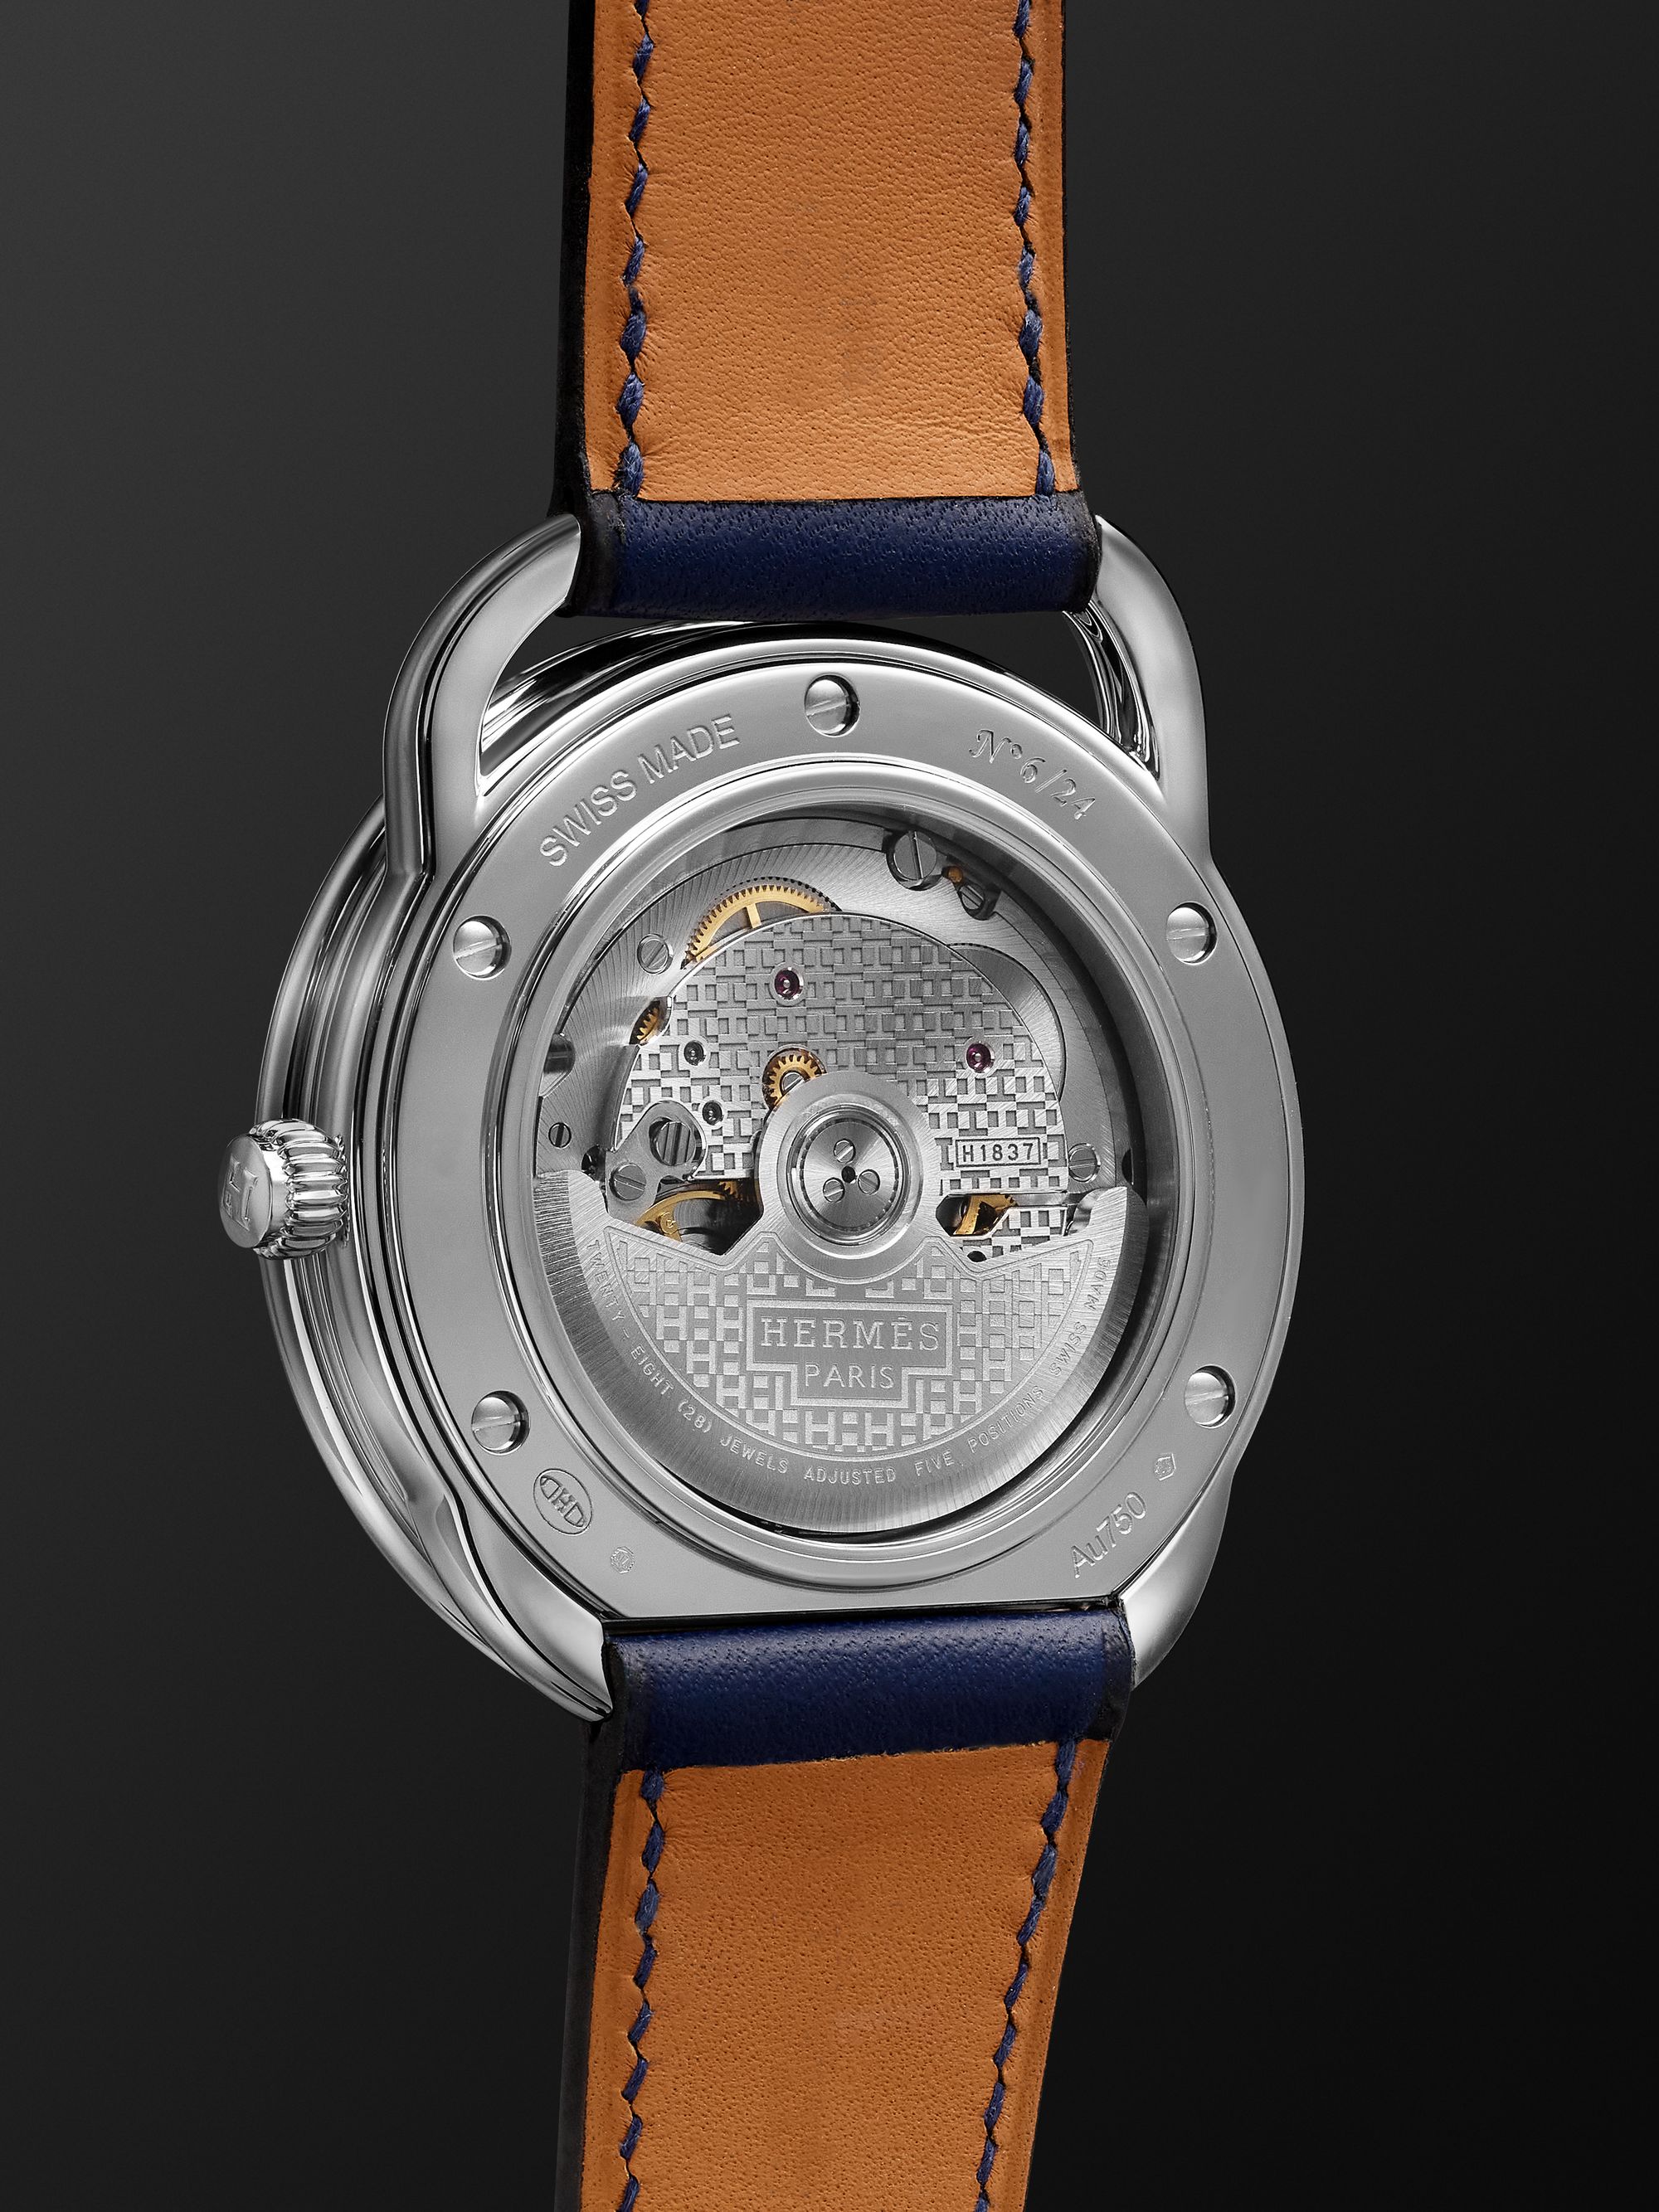 HERMÈS Arceau Wild Singapore Limited Edition Automatic 41mm White Gold and Leather Watch, Ref. No. 403020WW00